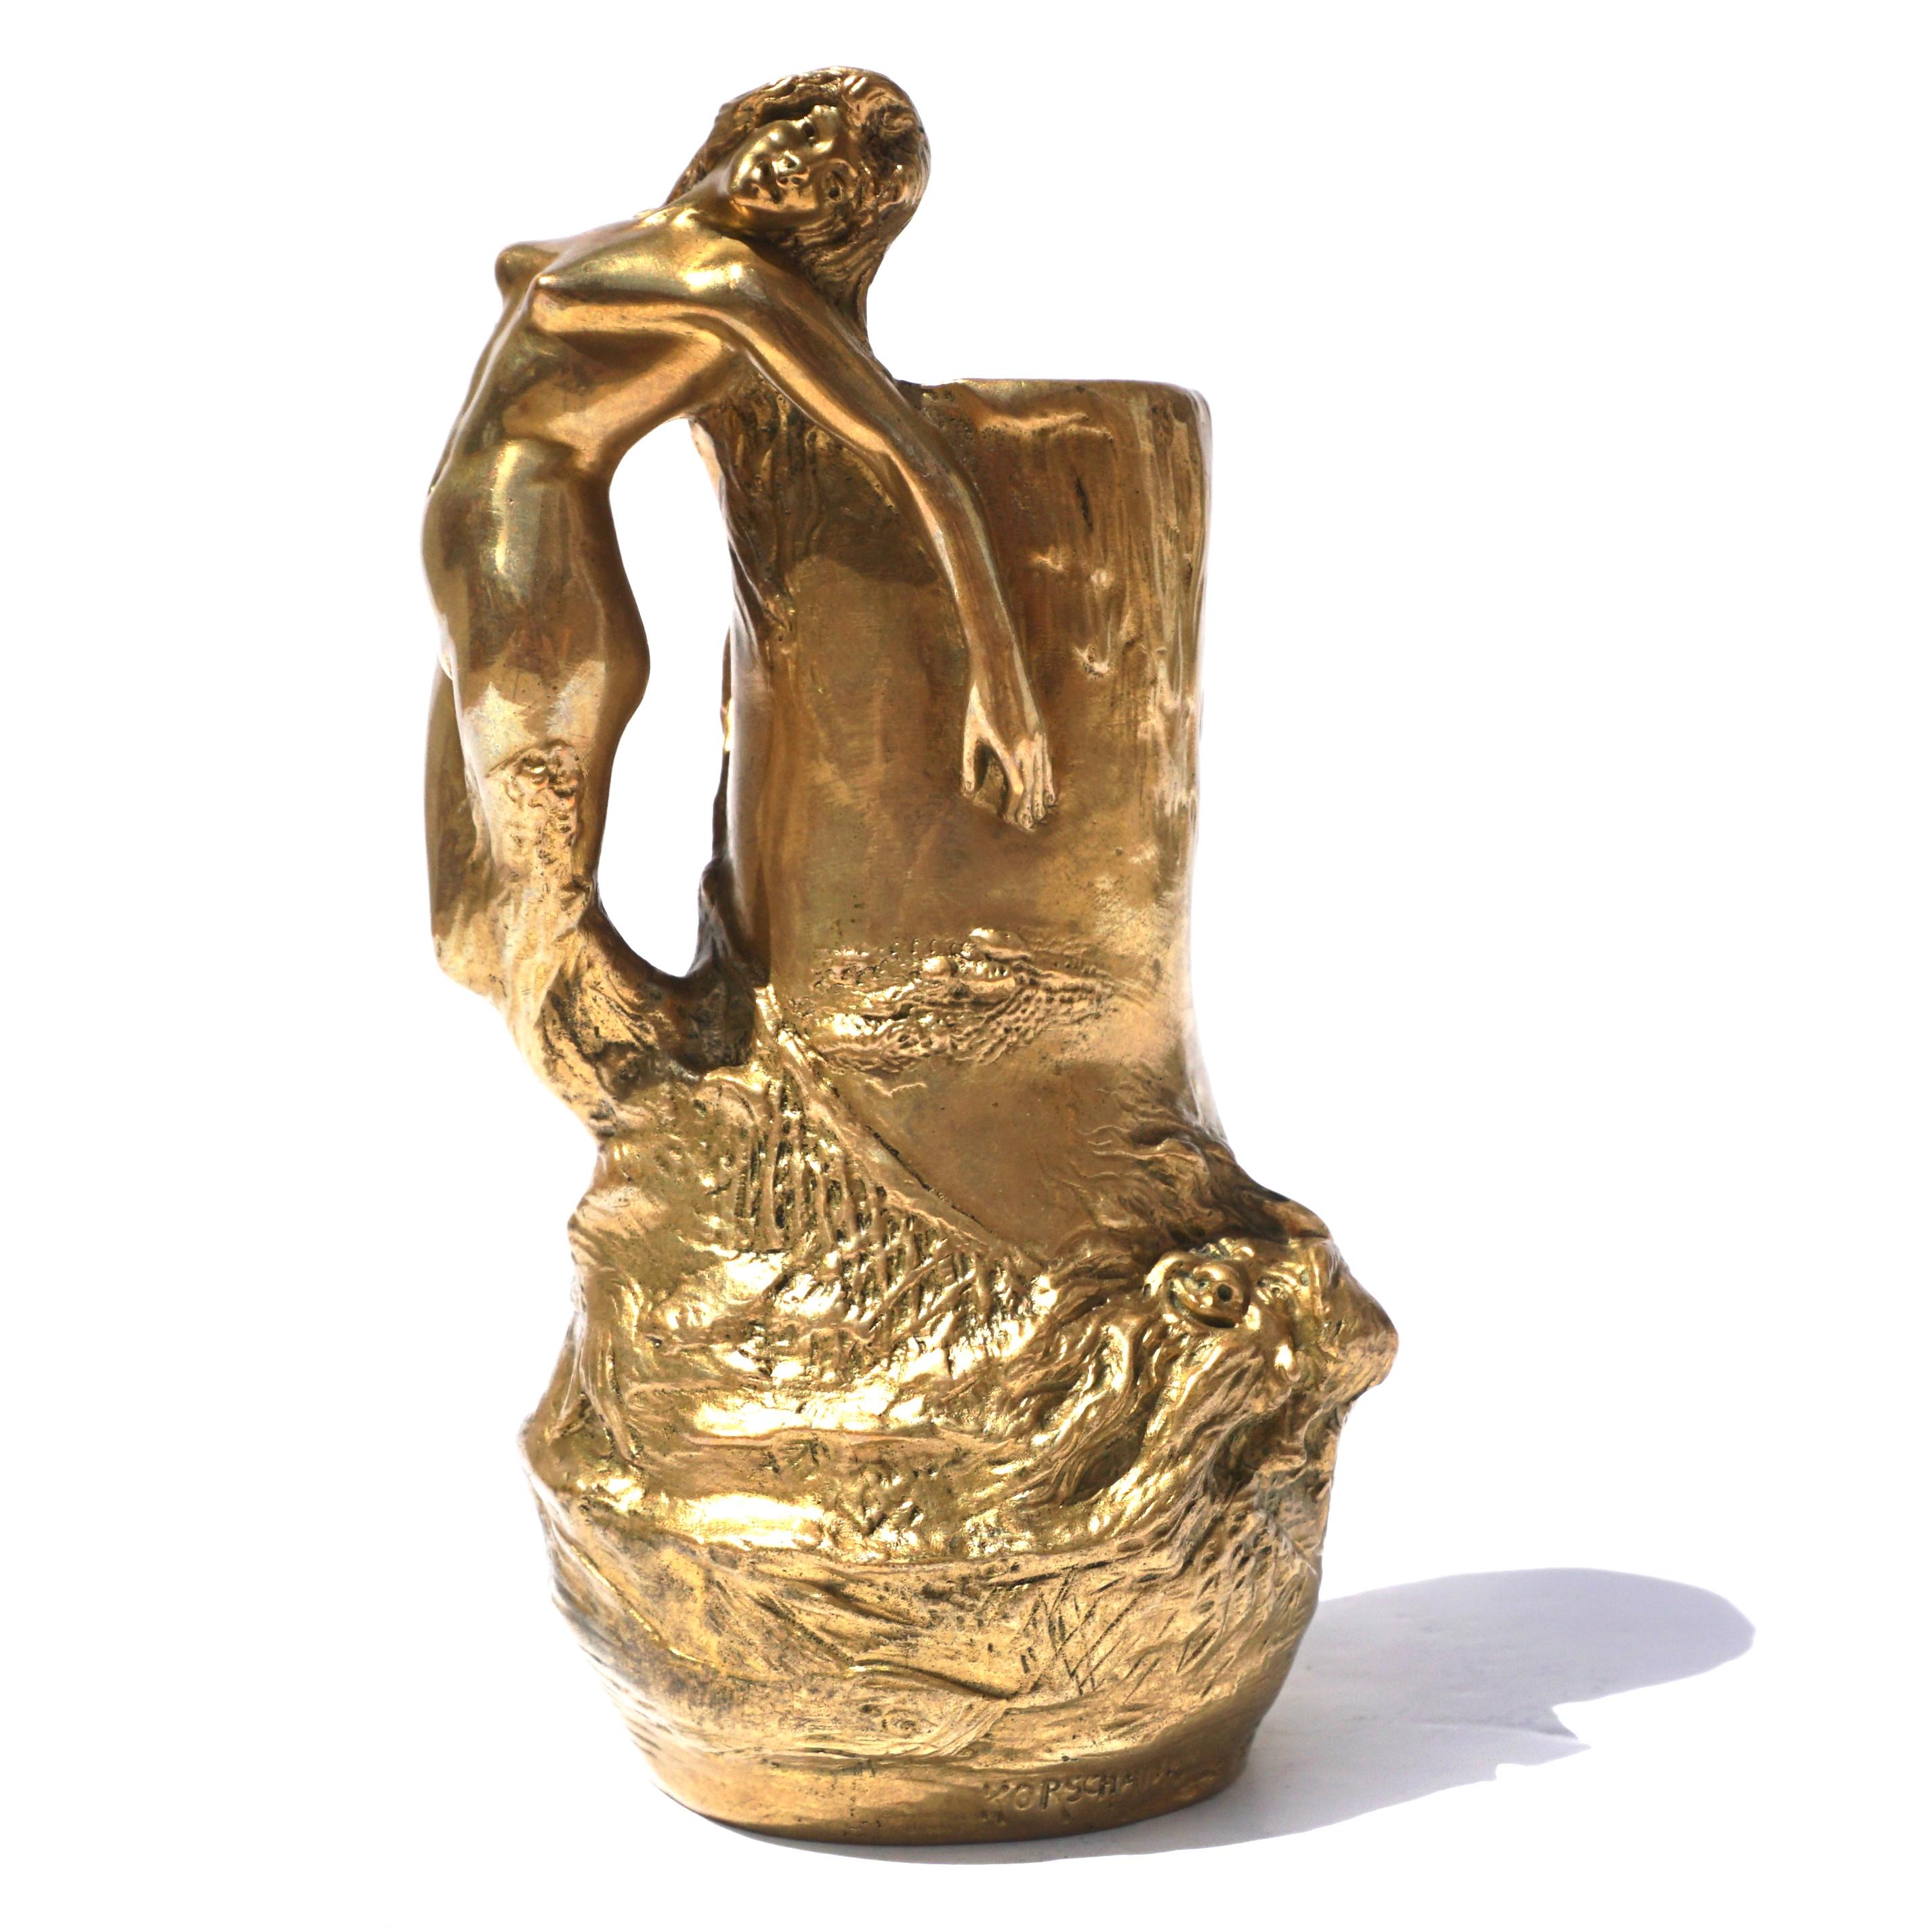 Charles Korschann Czechoslovakian 

Art Nouveau Gilt-Bronze Figural Bud Vase. Cast from a model by Charles (Karl) Korschann, circa 1899, of urn form, with a handle in the form of a siren caught in a net, engraved with a presentation ROGER 29